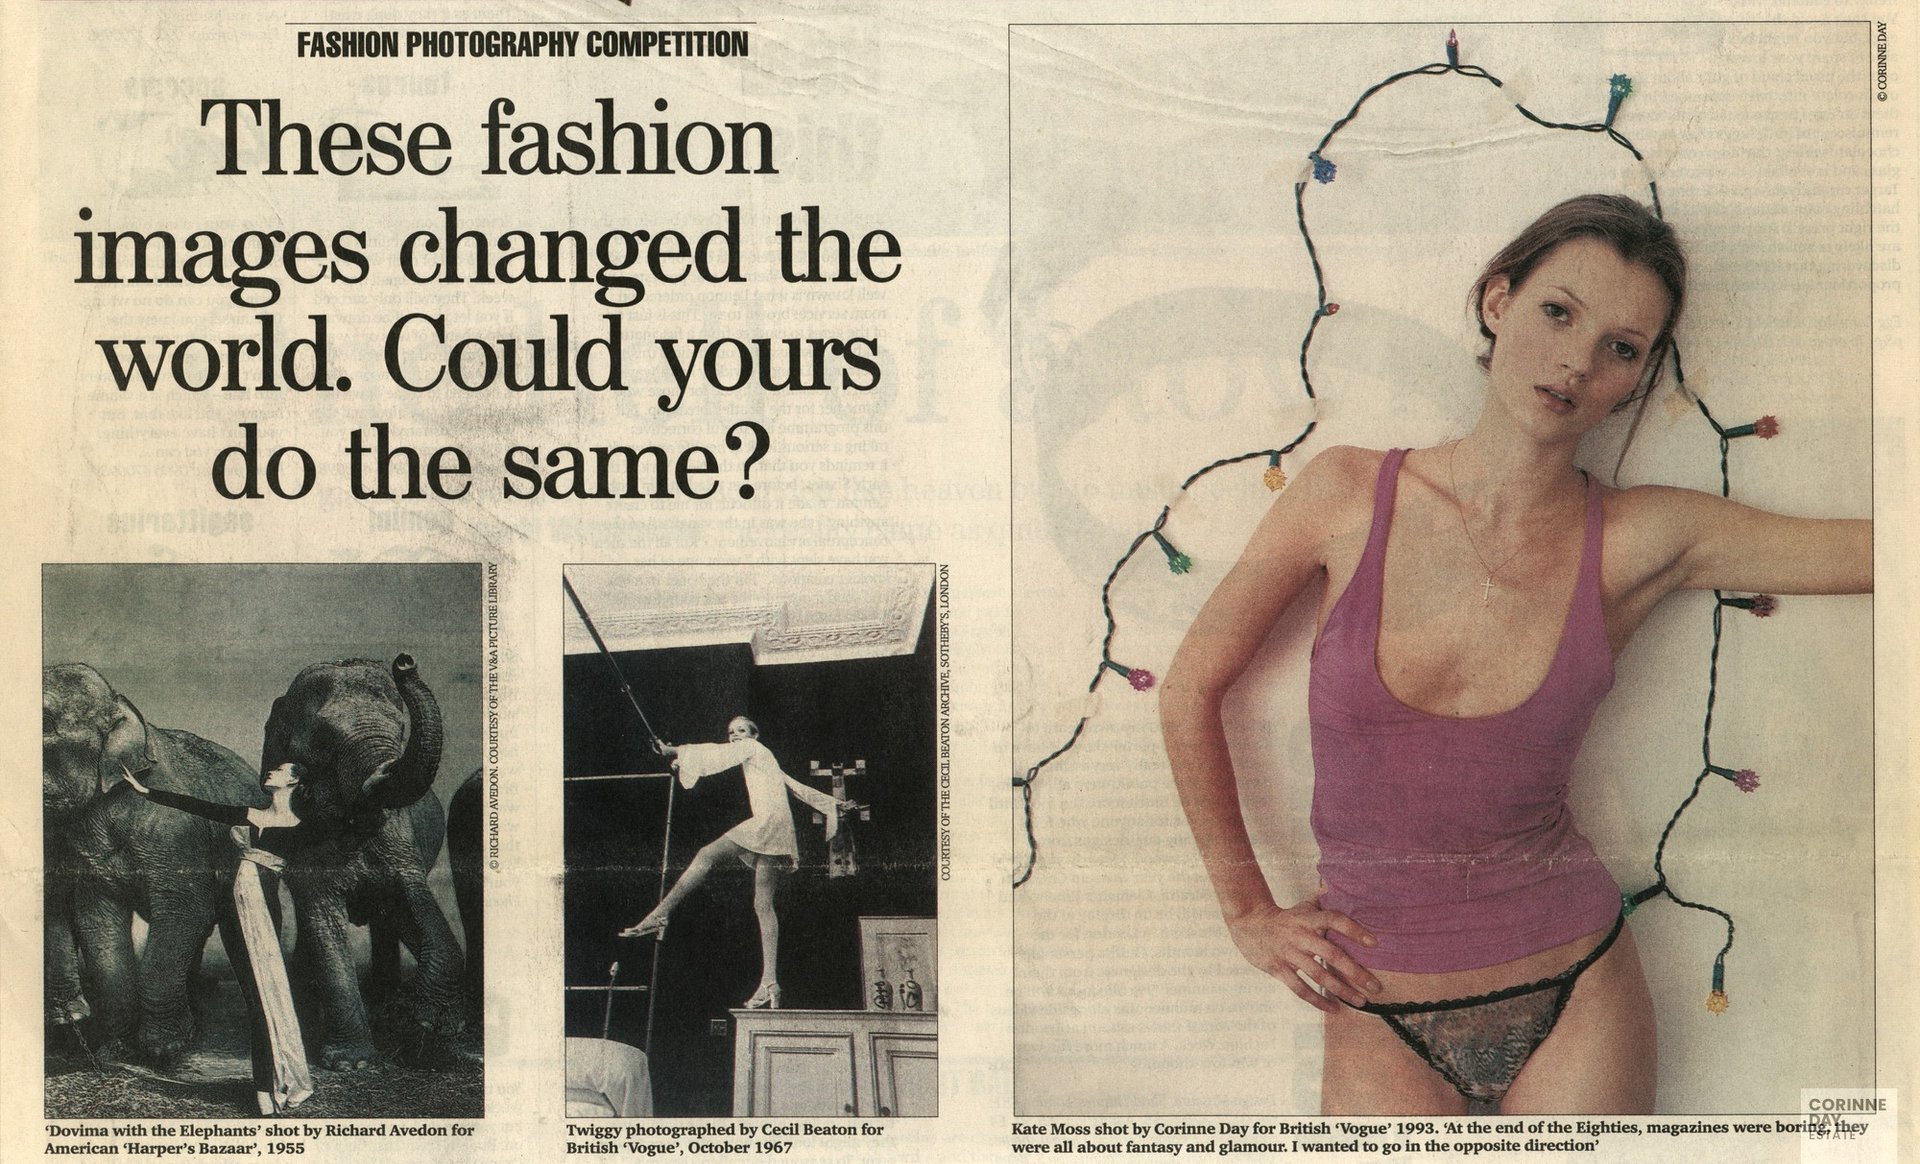 These fashion images changed the world. Could yours do the same?, The Independnent on Sunday, 28 Mar 1999 — Image 1 of 3